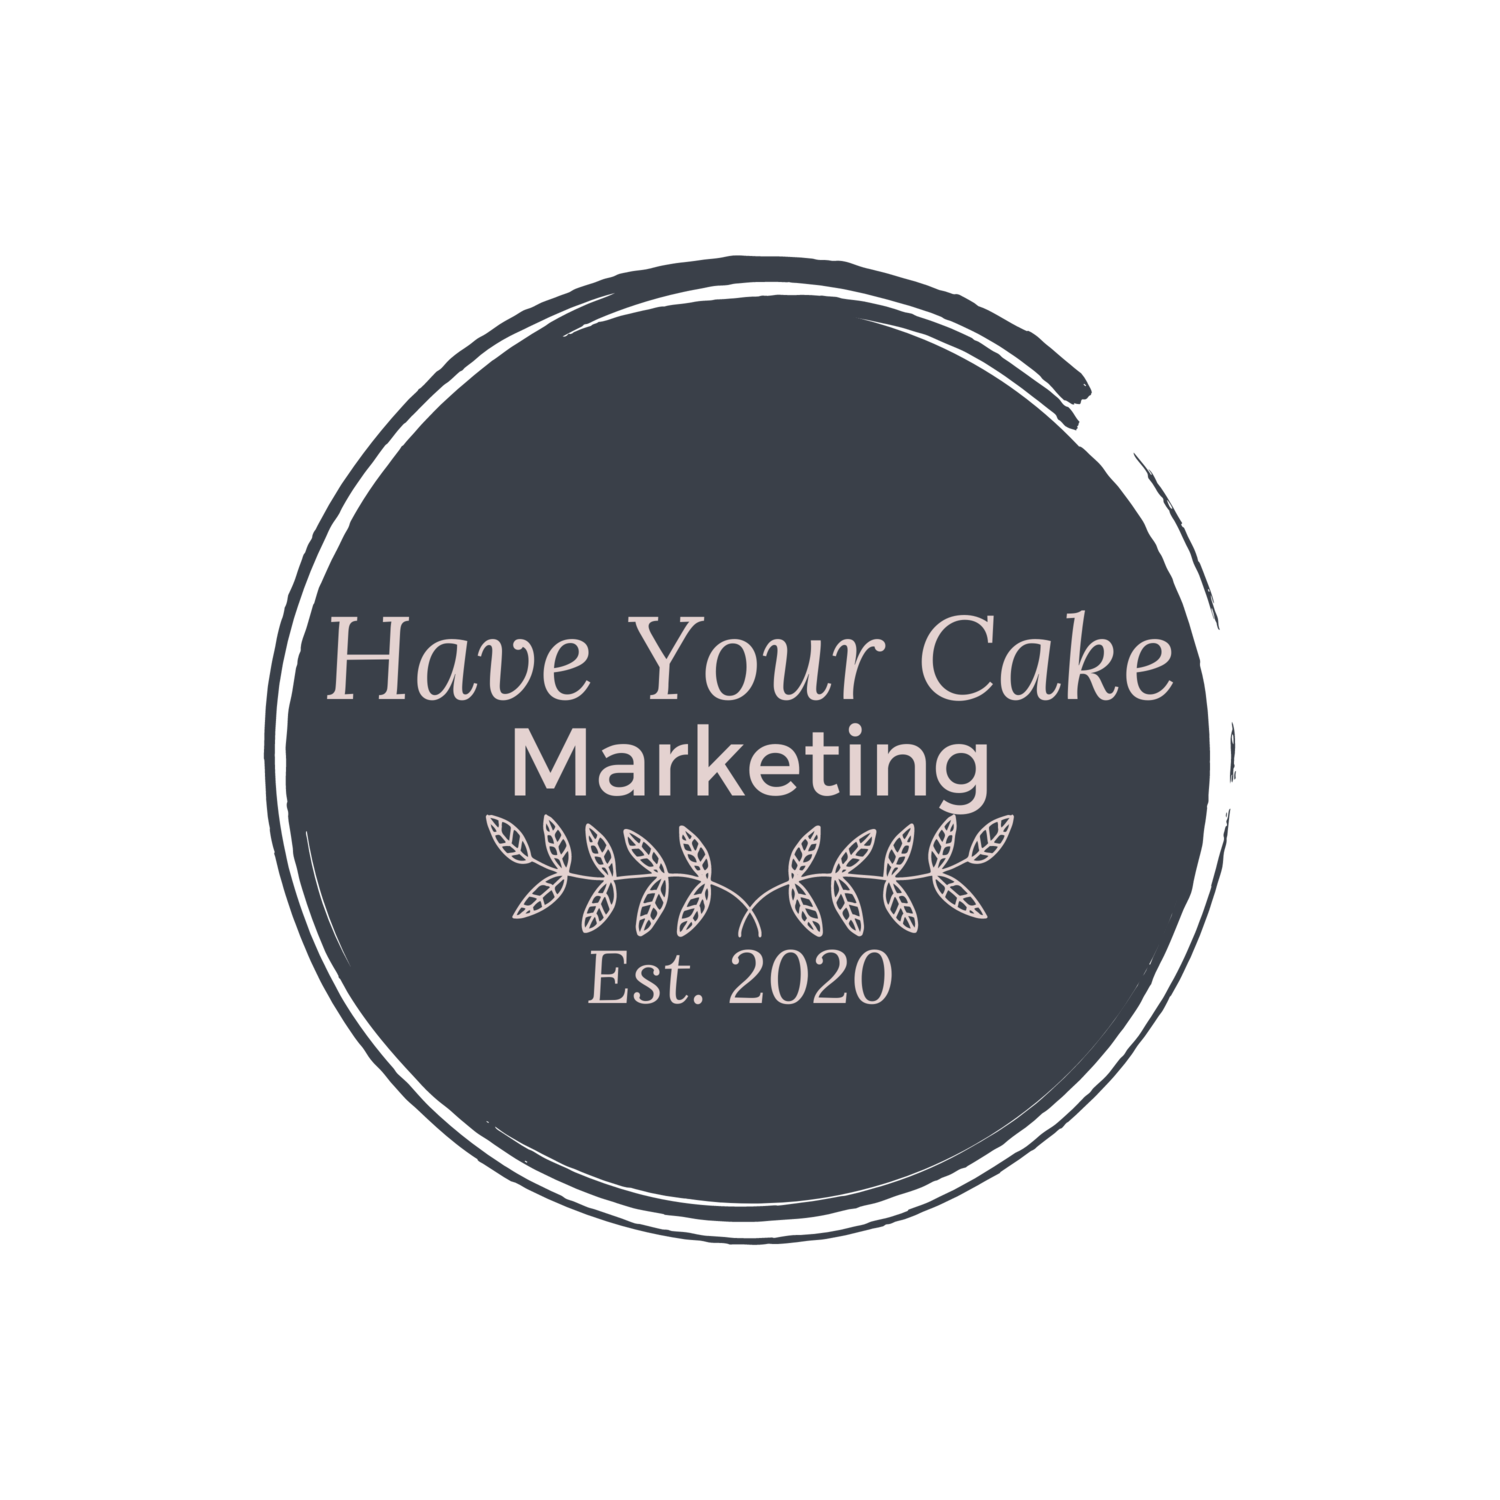 Have Your Cake Marketing